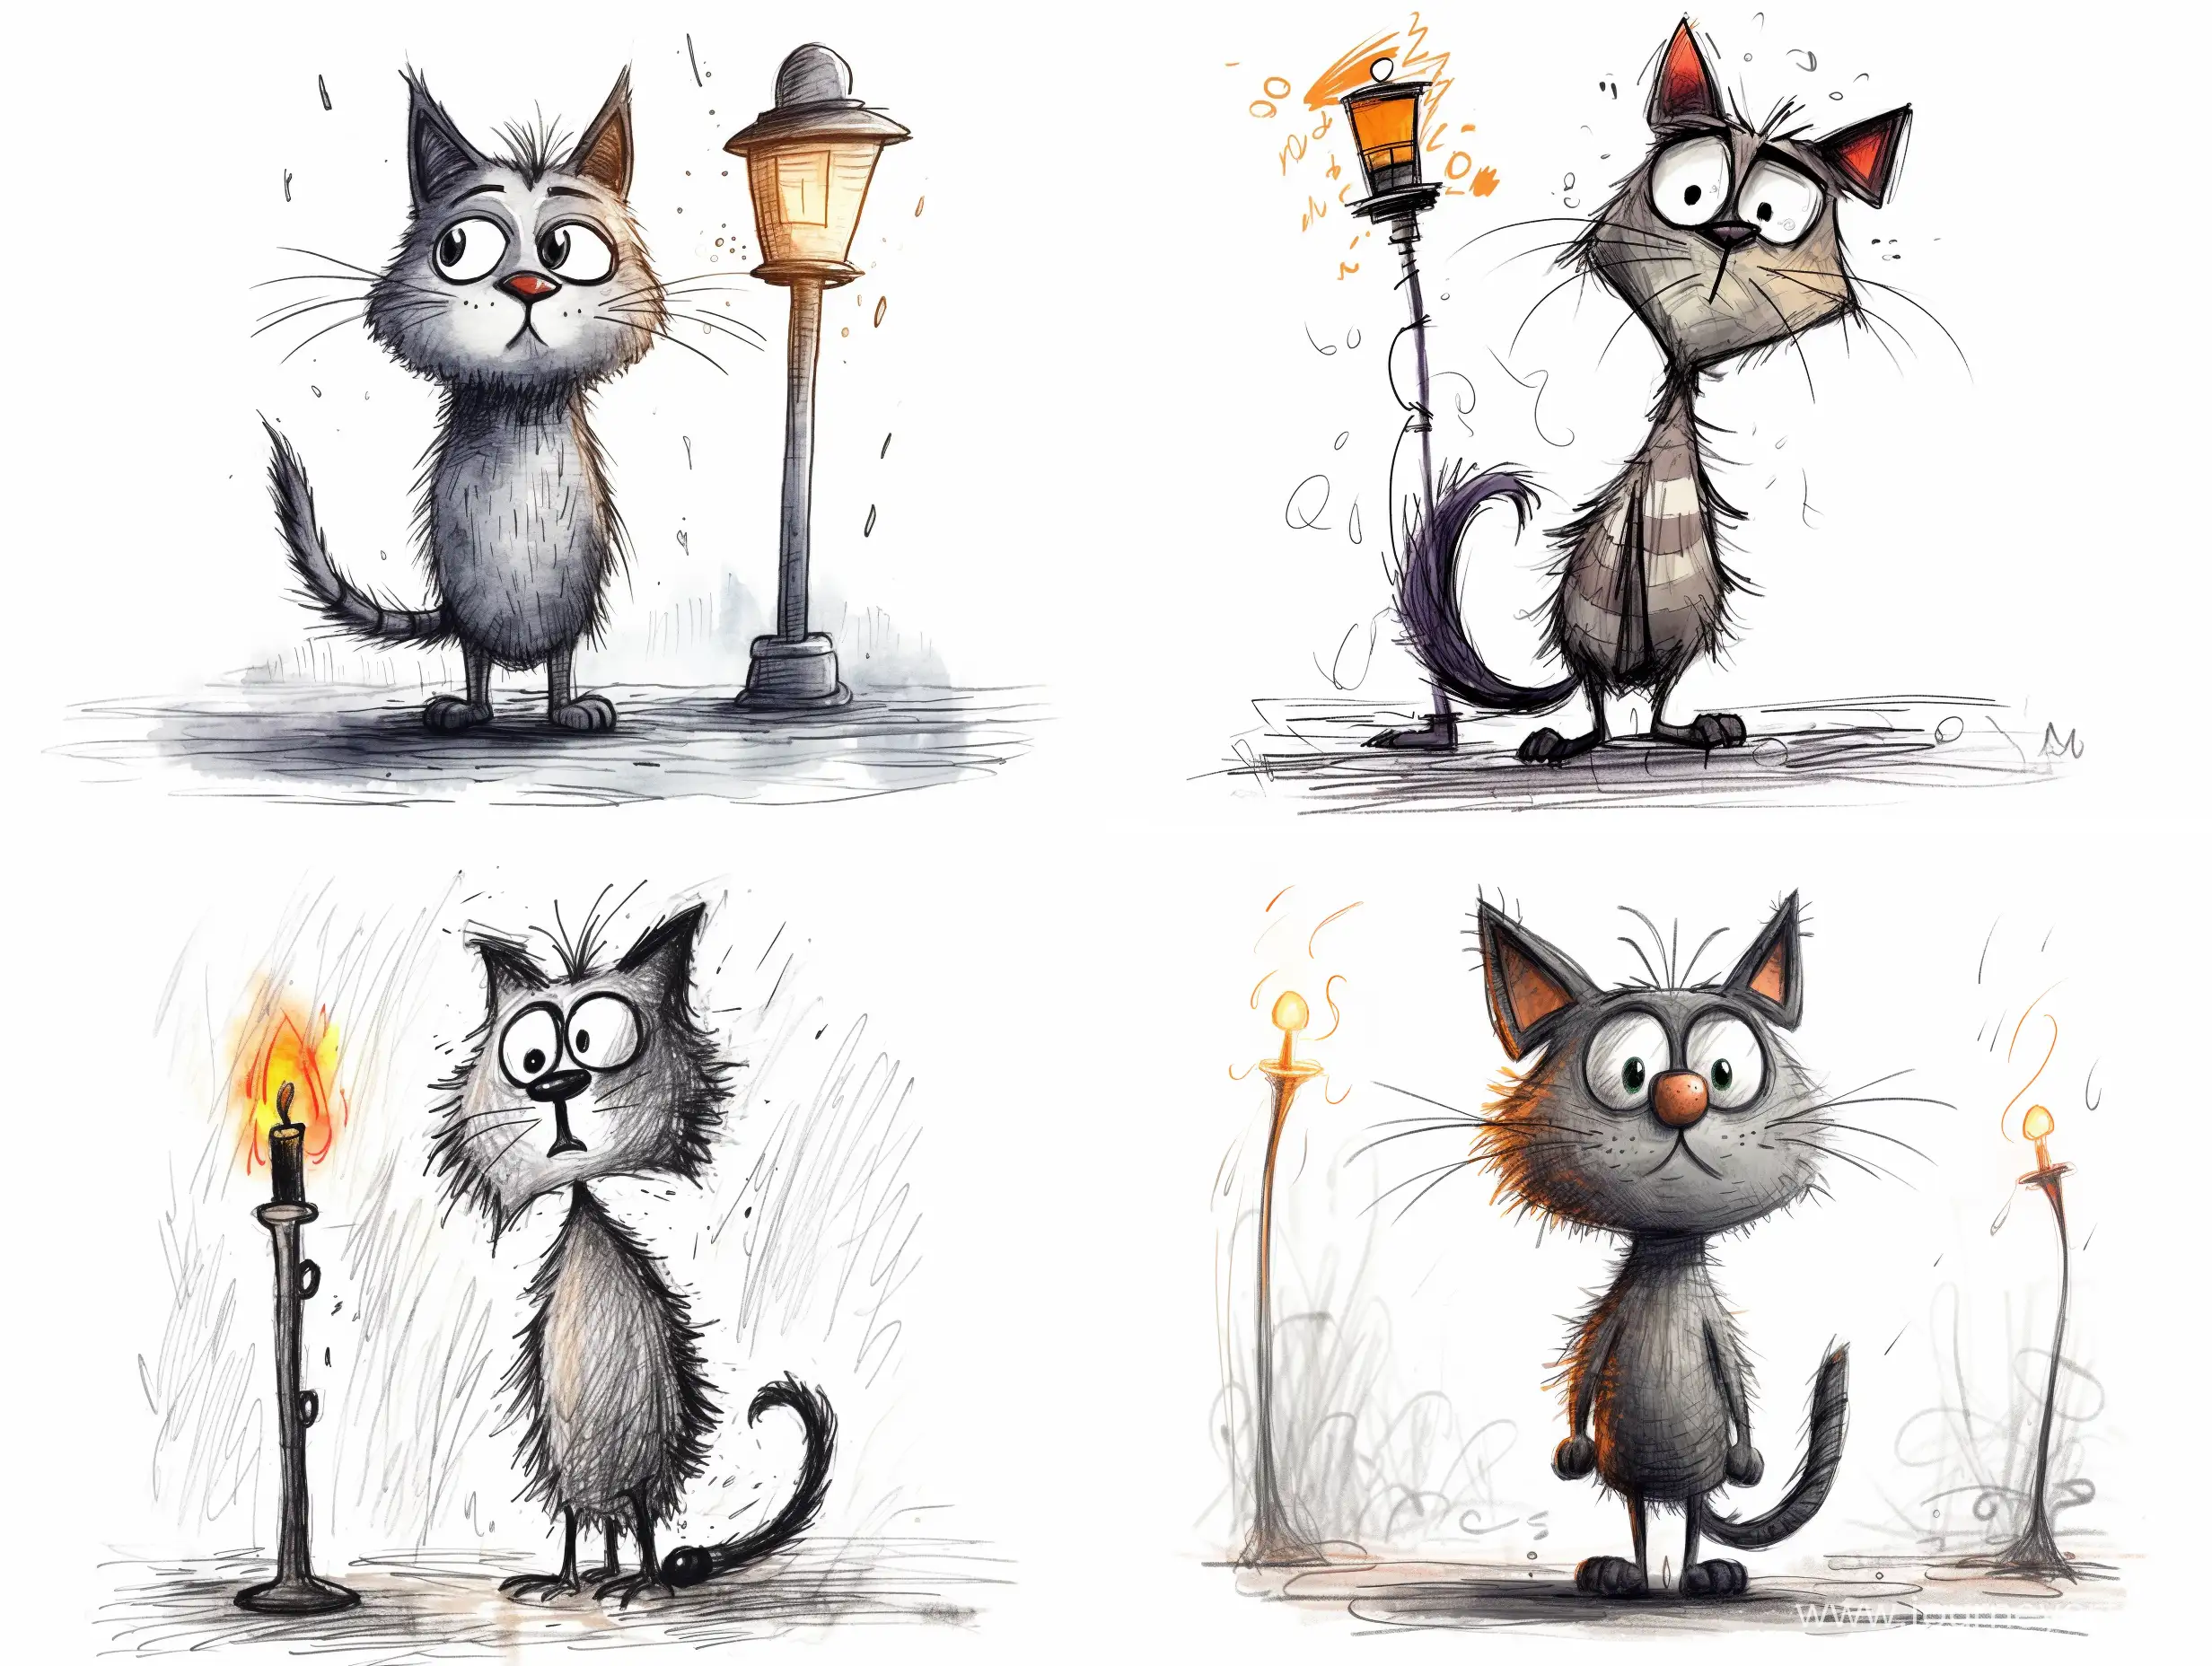 Disgruntled-Cat-in-Shaggy-Attire-Ventures-into-Fog-with-Light-Bulb